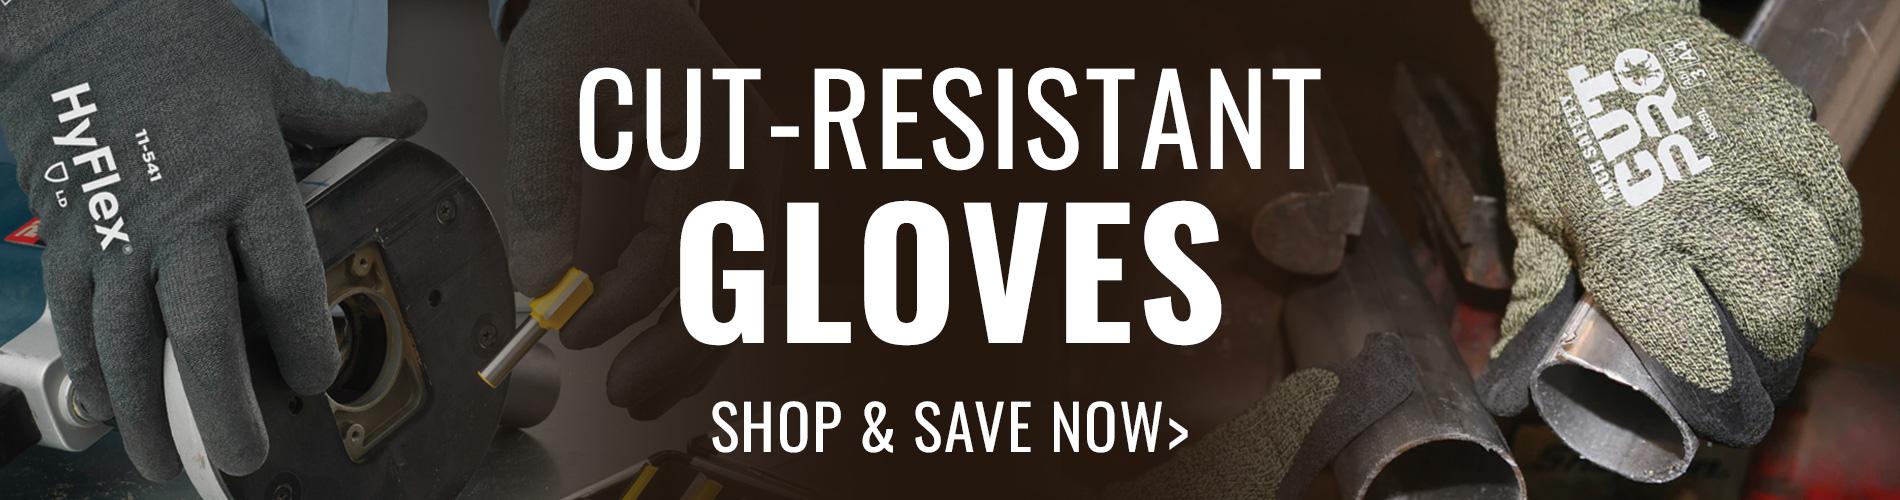 AMI-Cut-Resistant-Gloves-Home